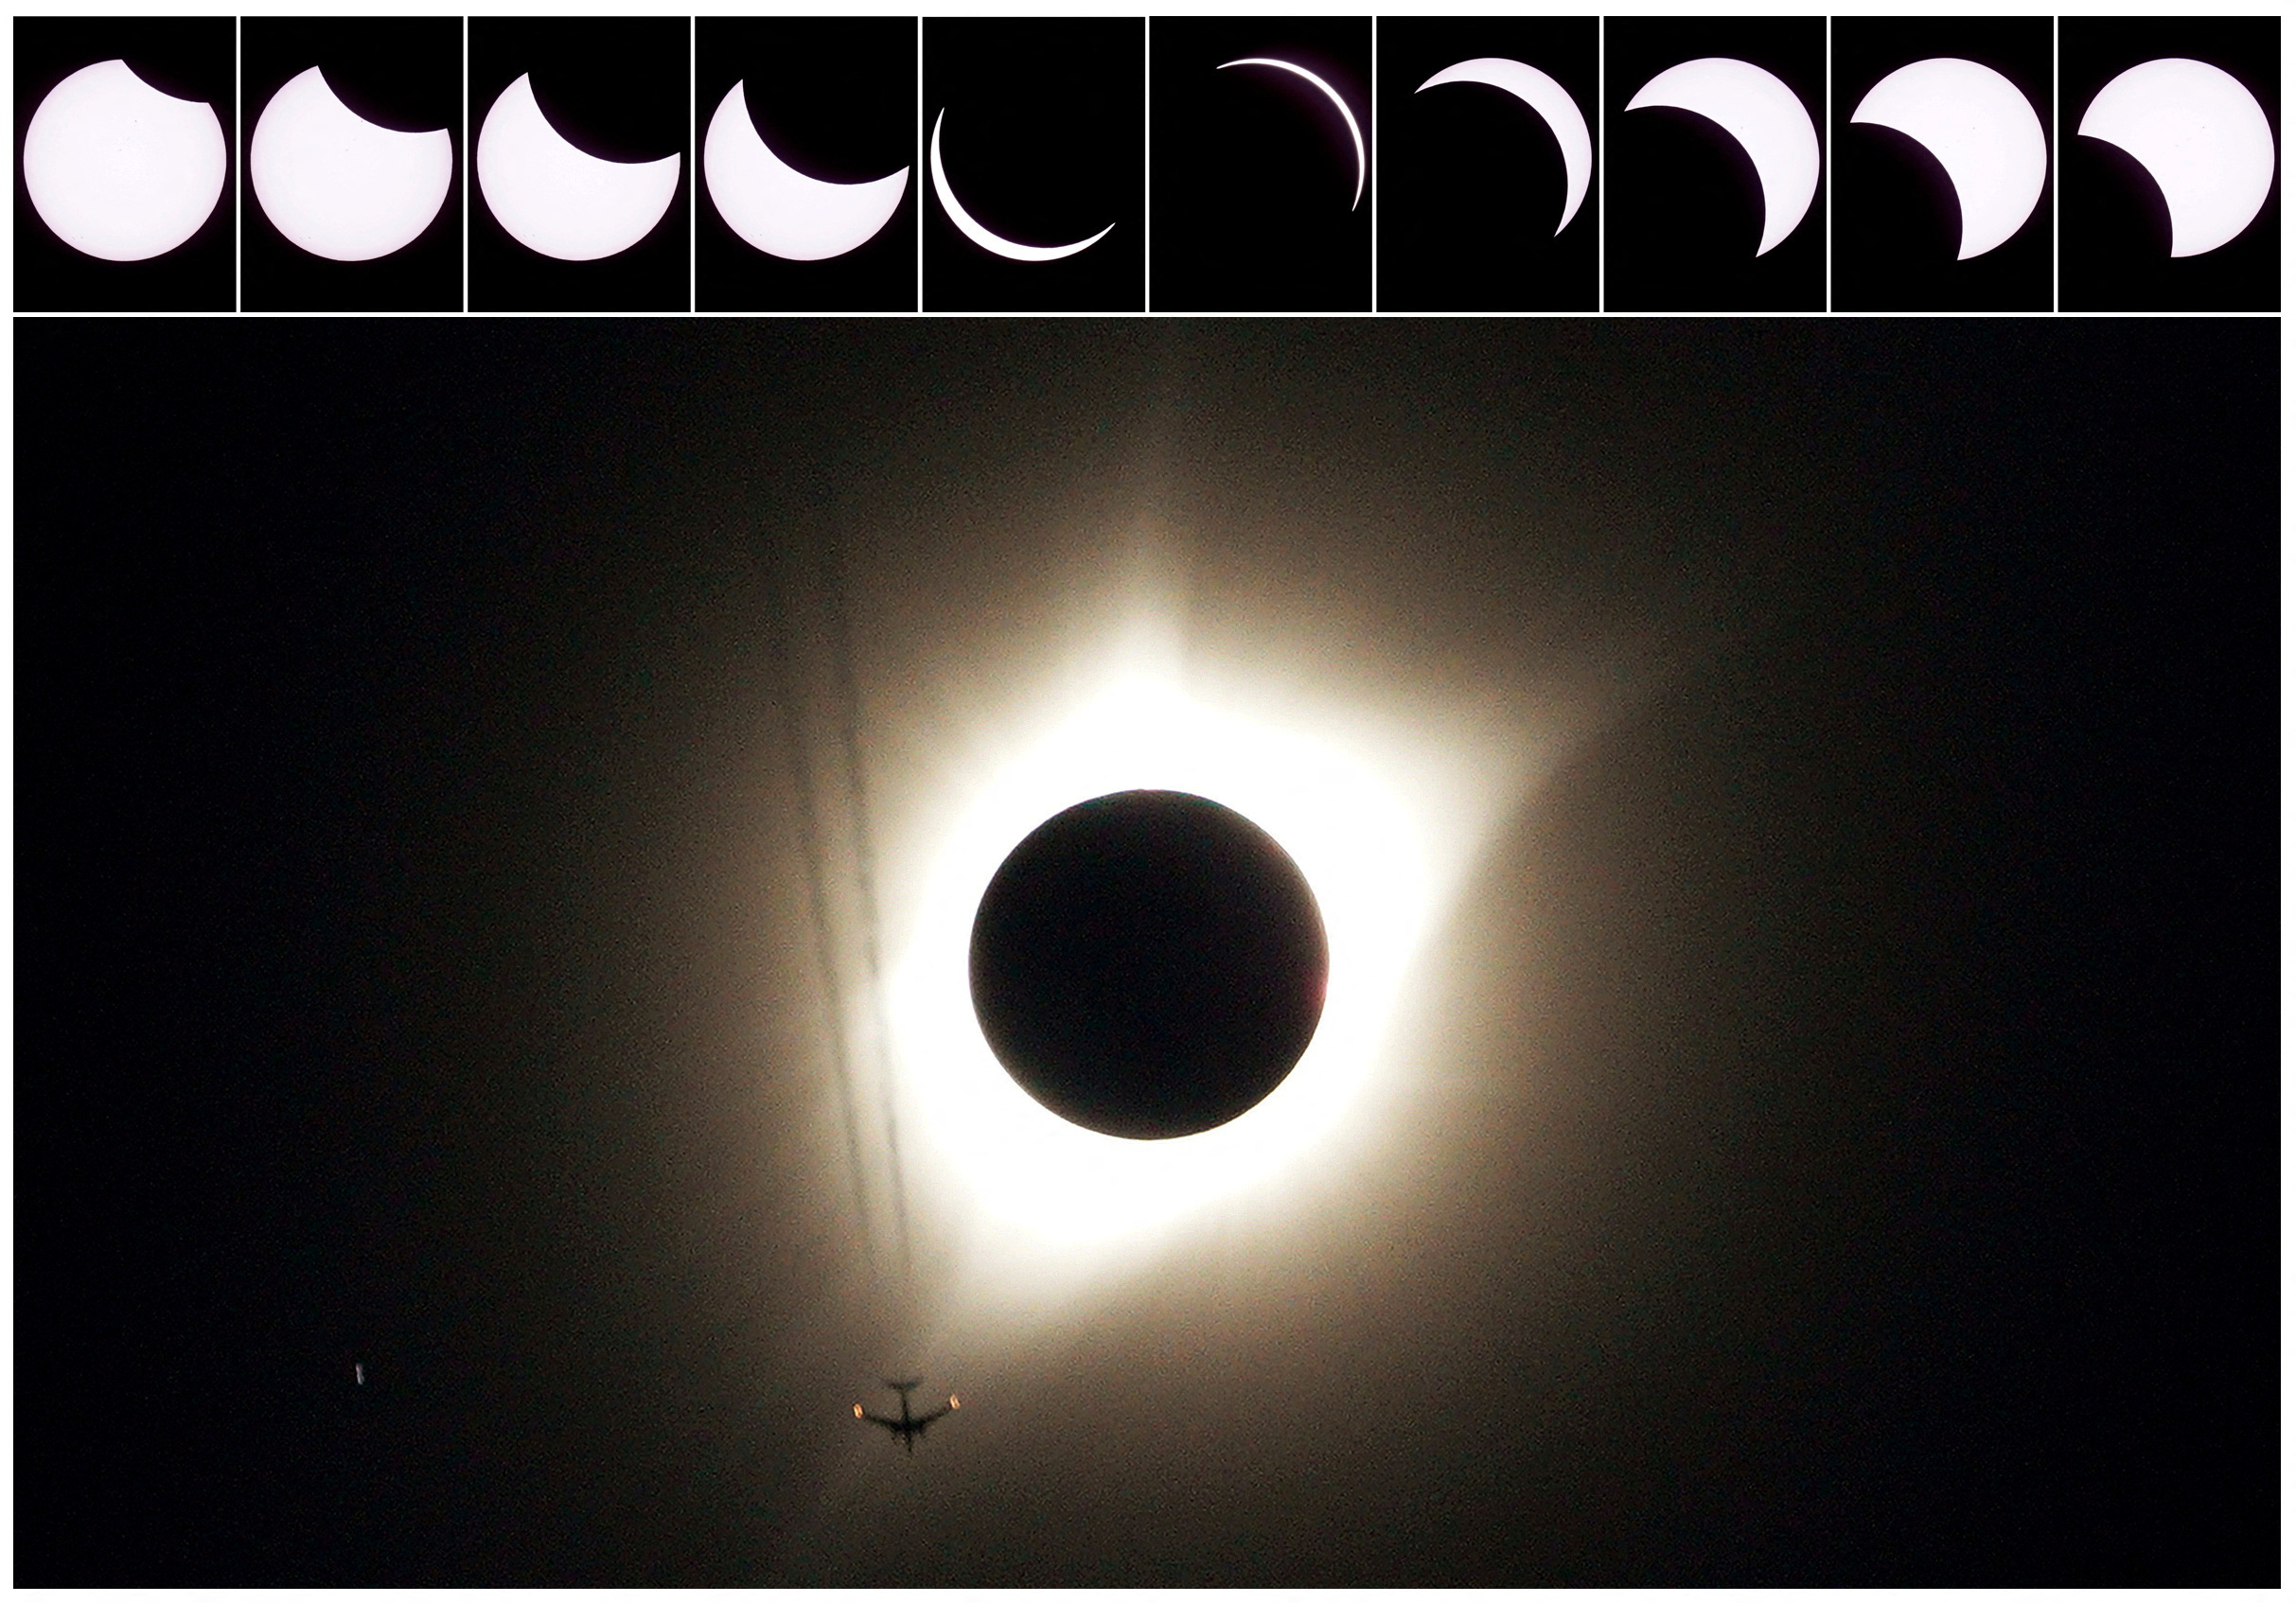 This image is imaginary and does not show the solar eclipse fr